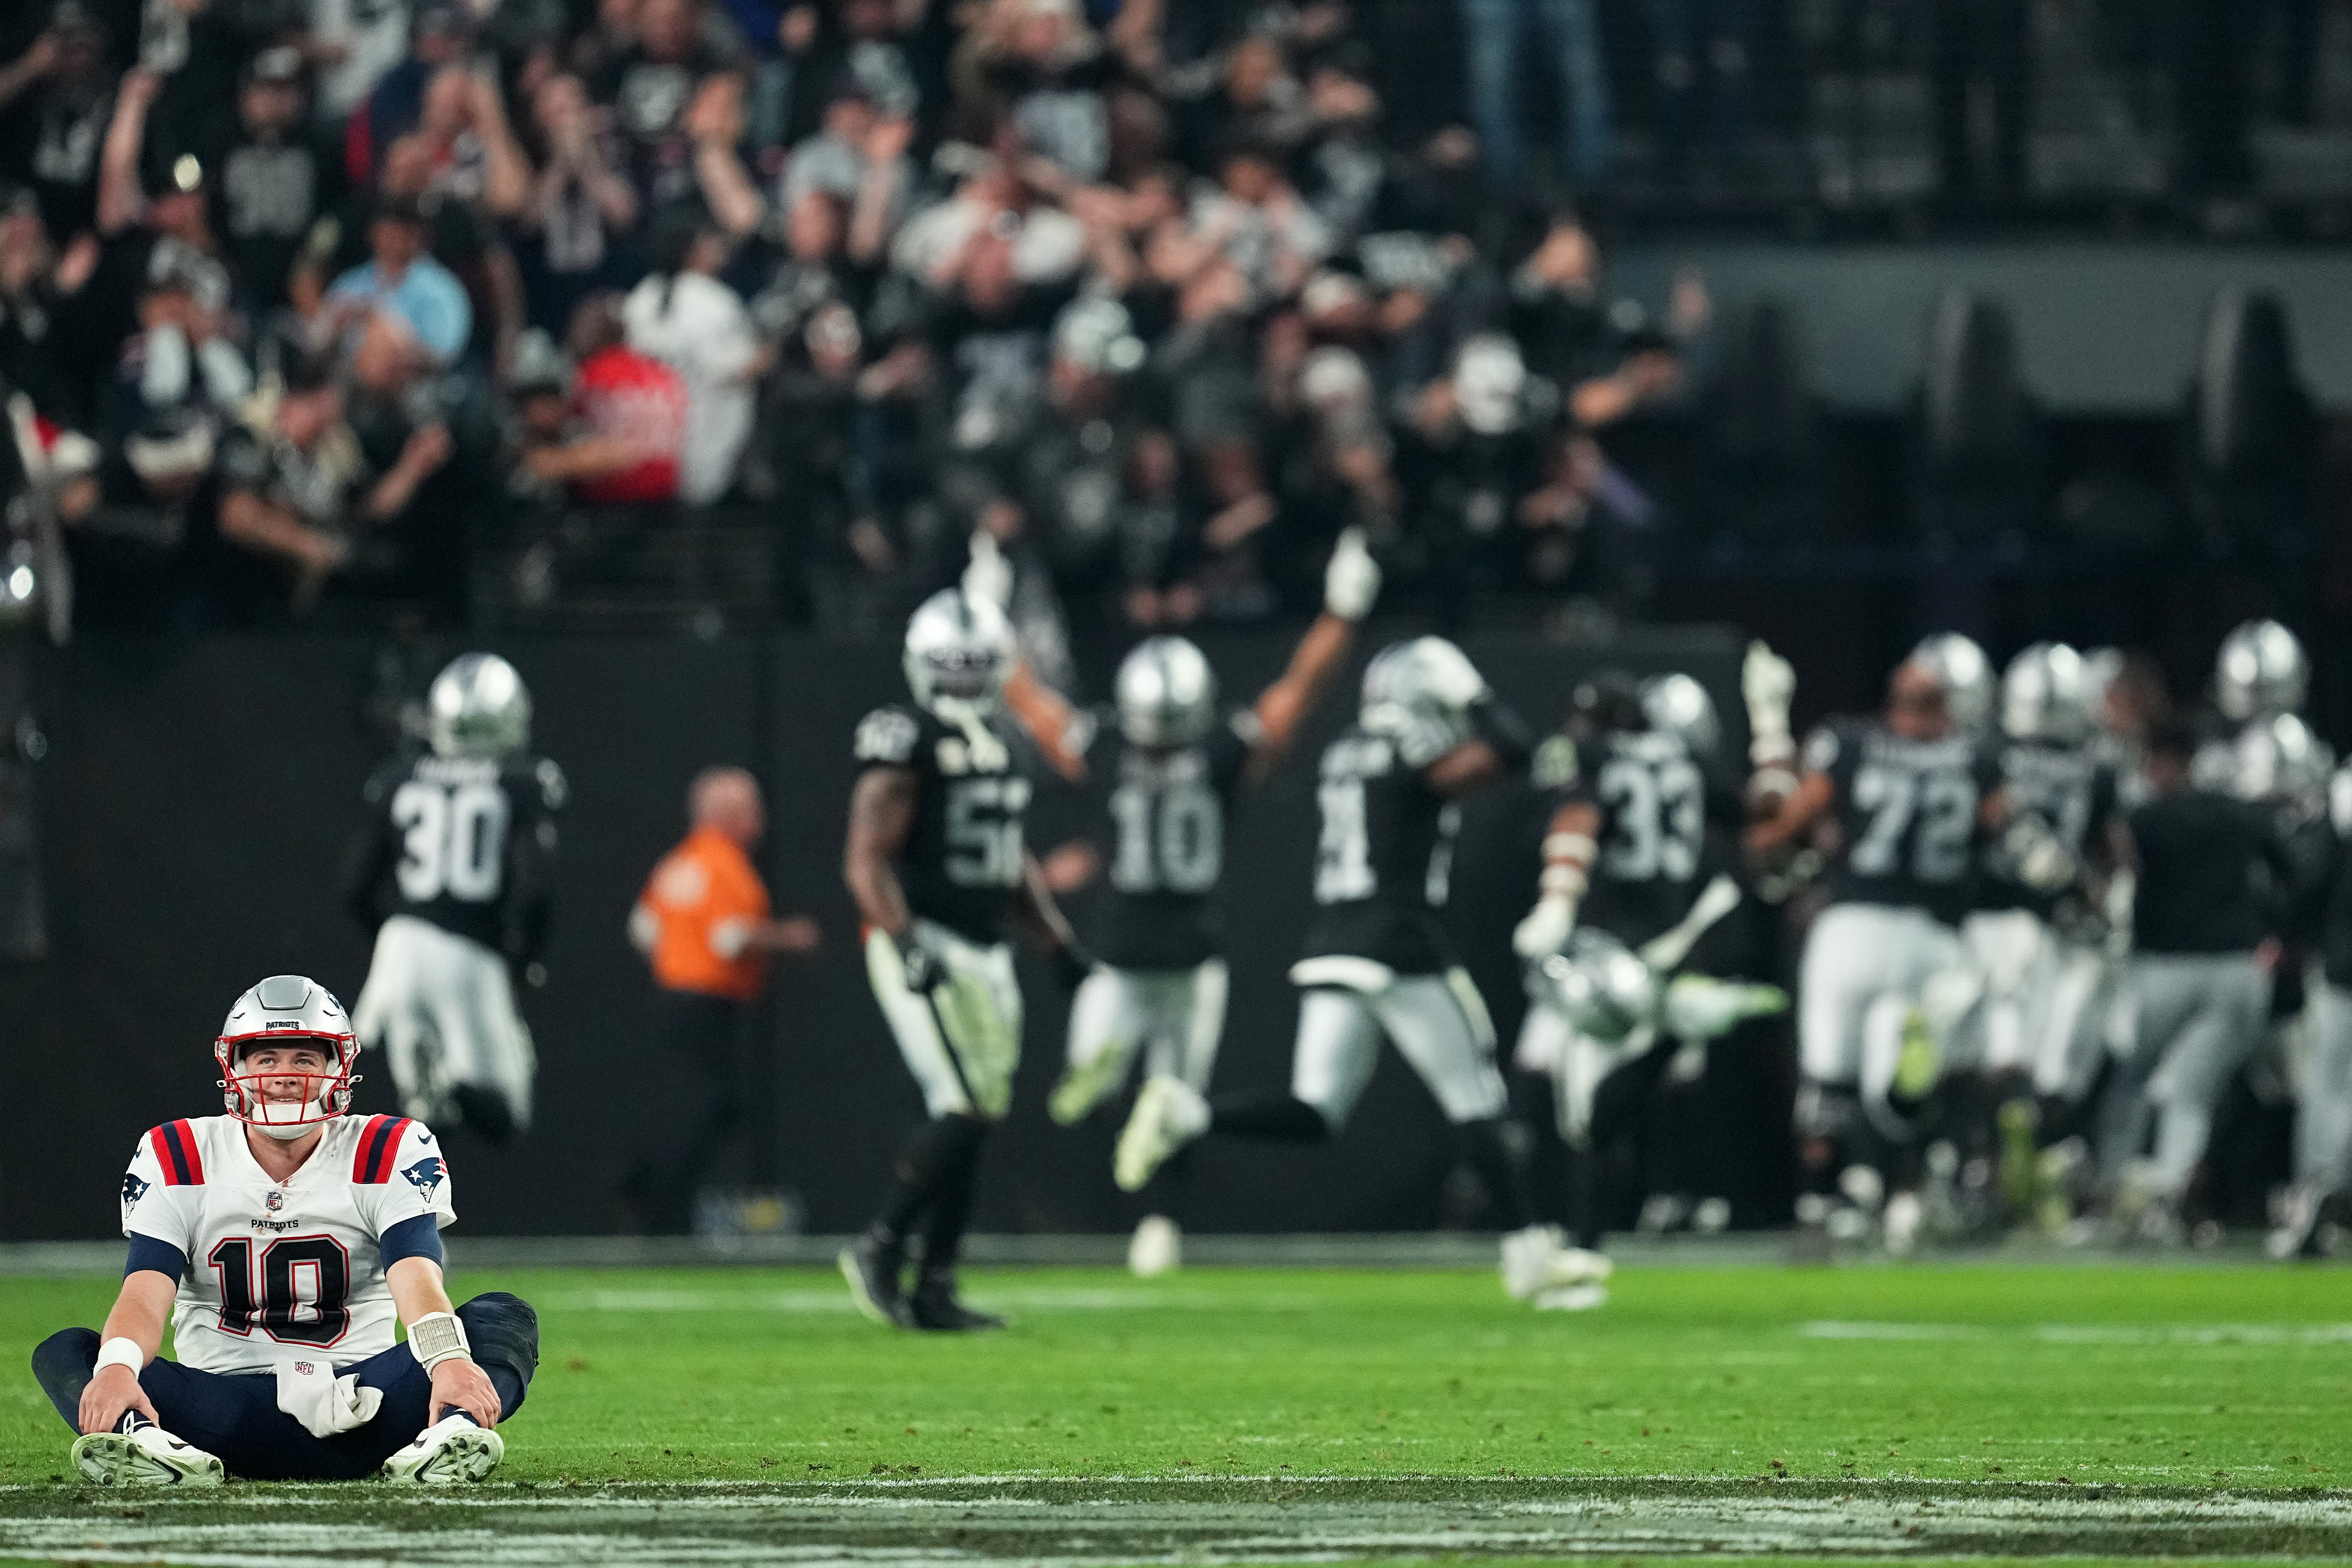 ‘Unbelievable': NFL Twitter Erupts With Reactions to Wild Patriots-Raiders Ending